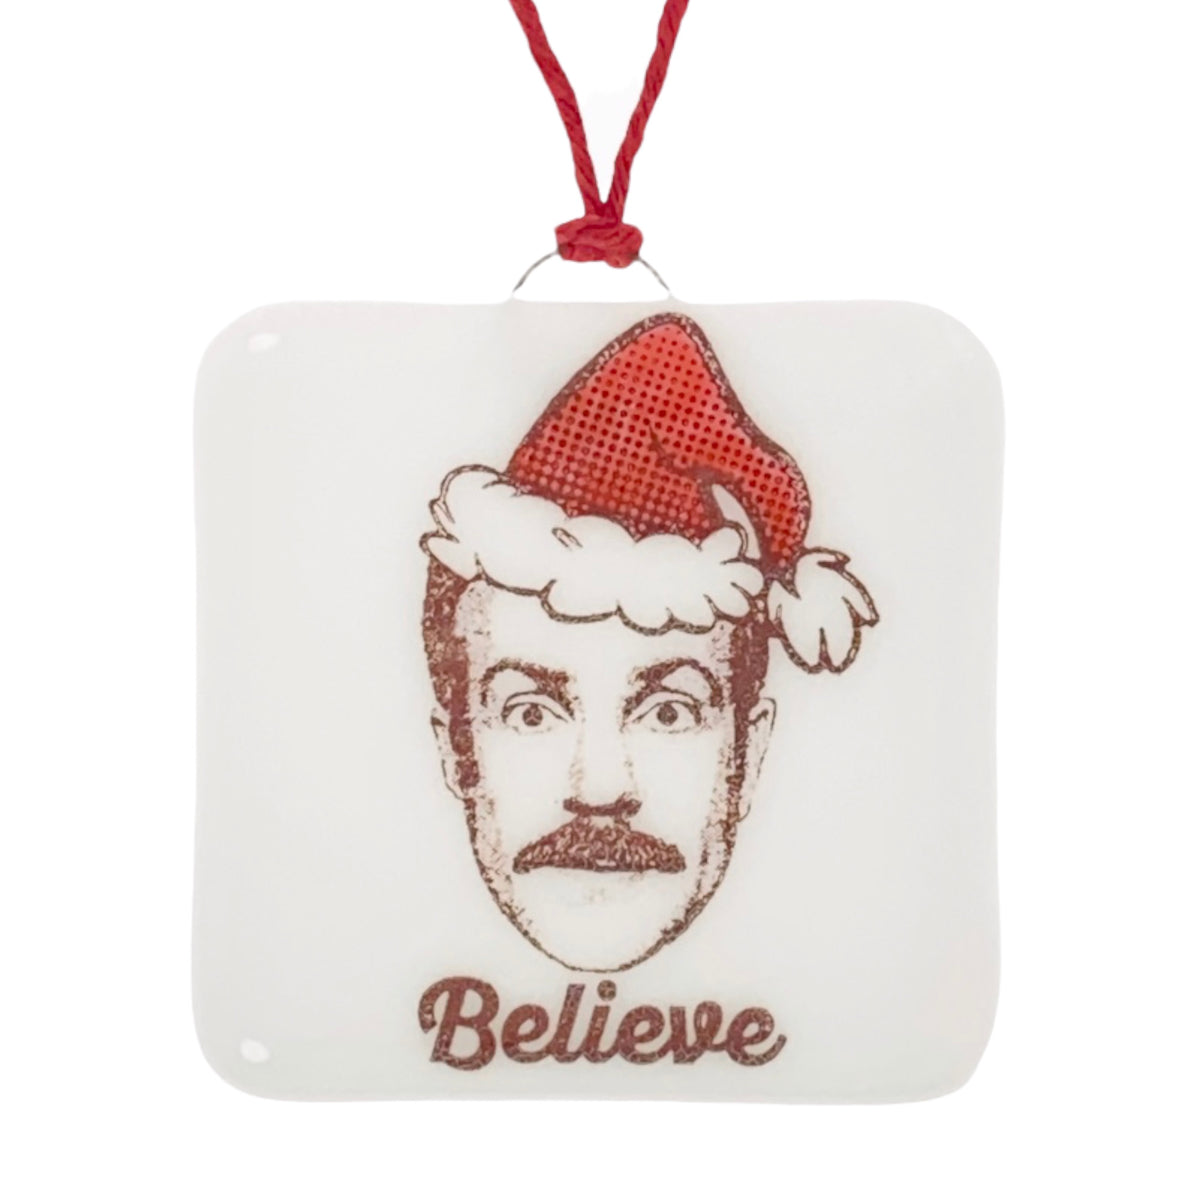 Ted Lasso Ornament "Believe"